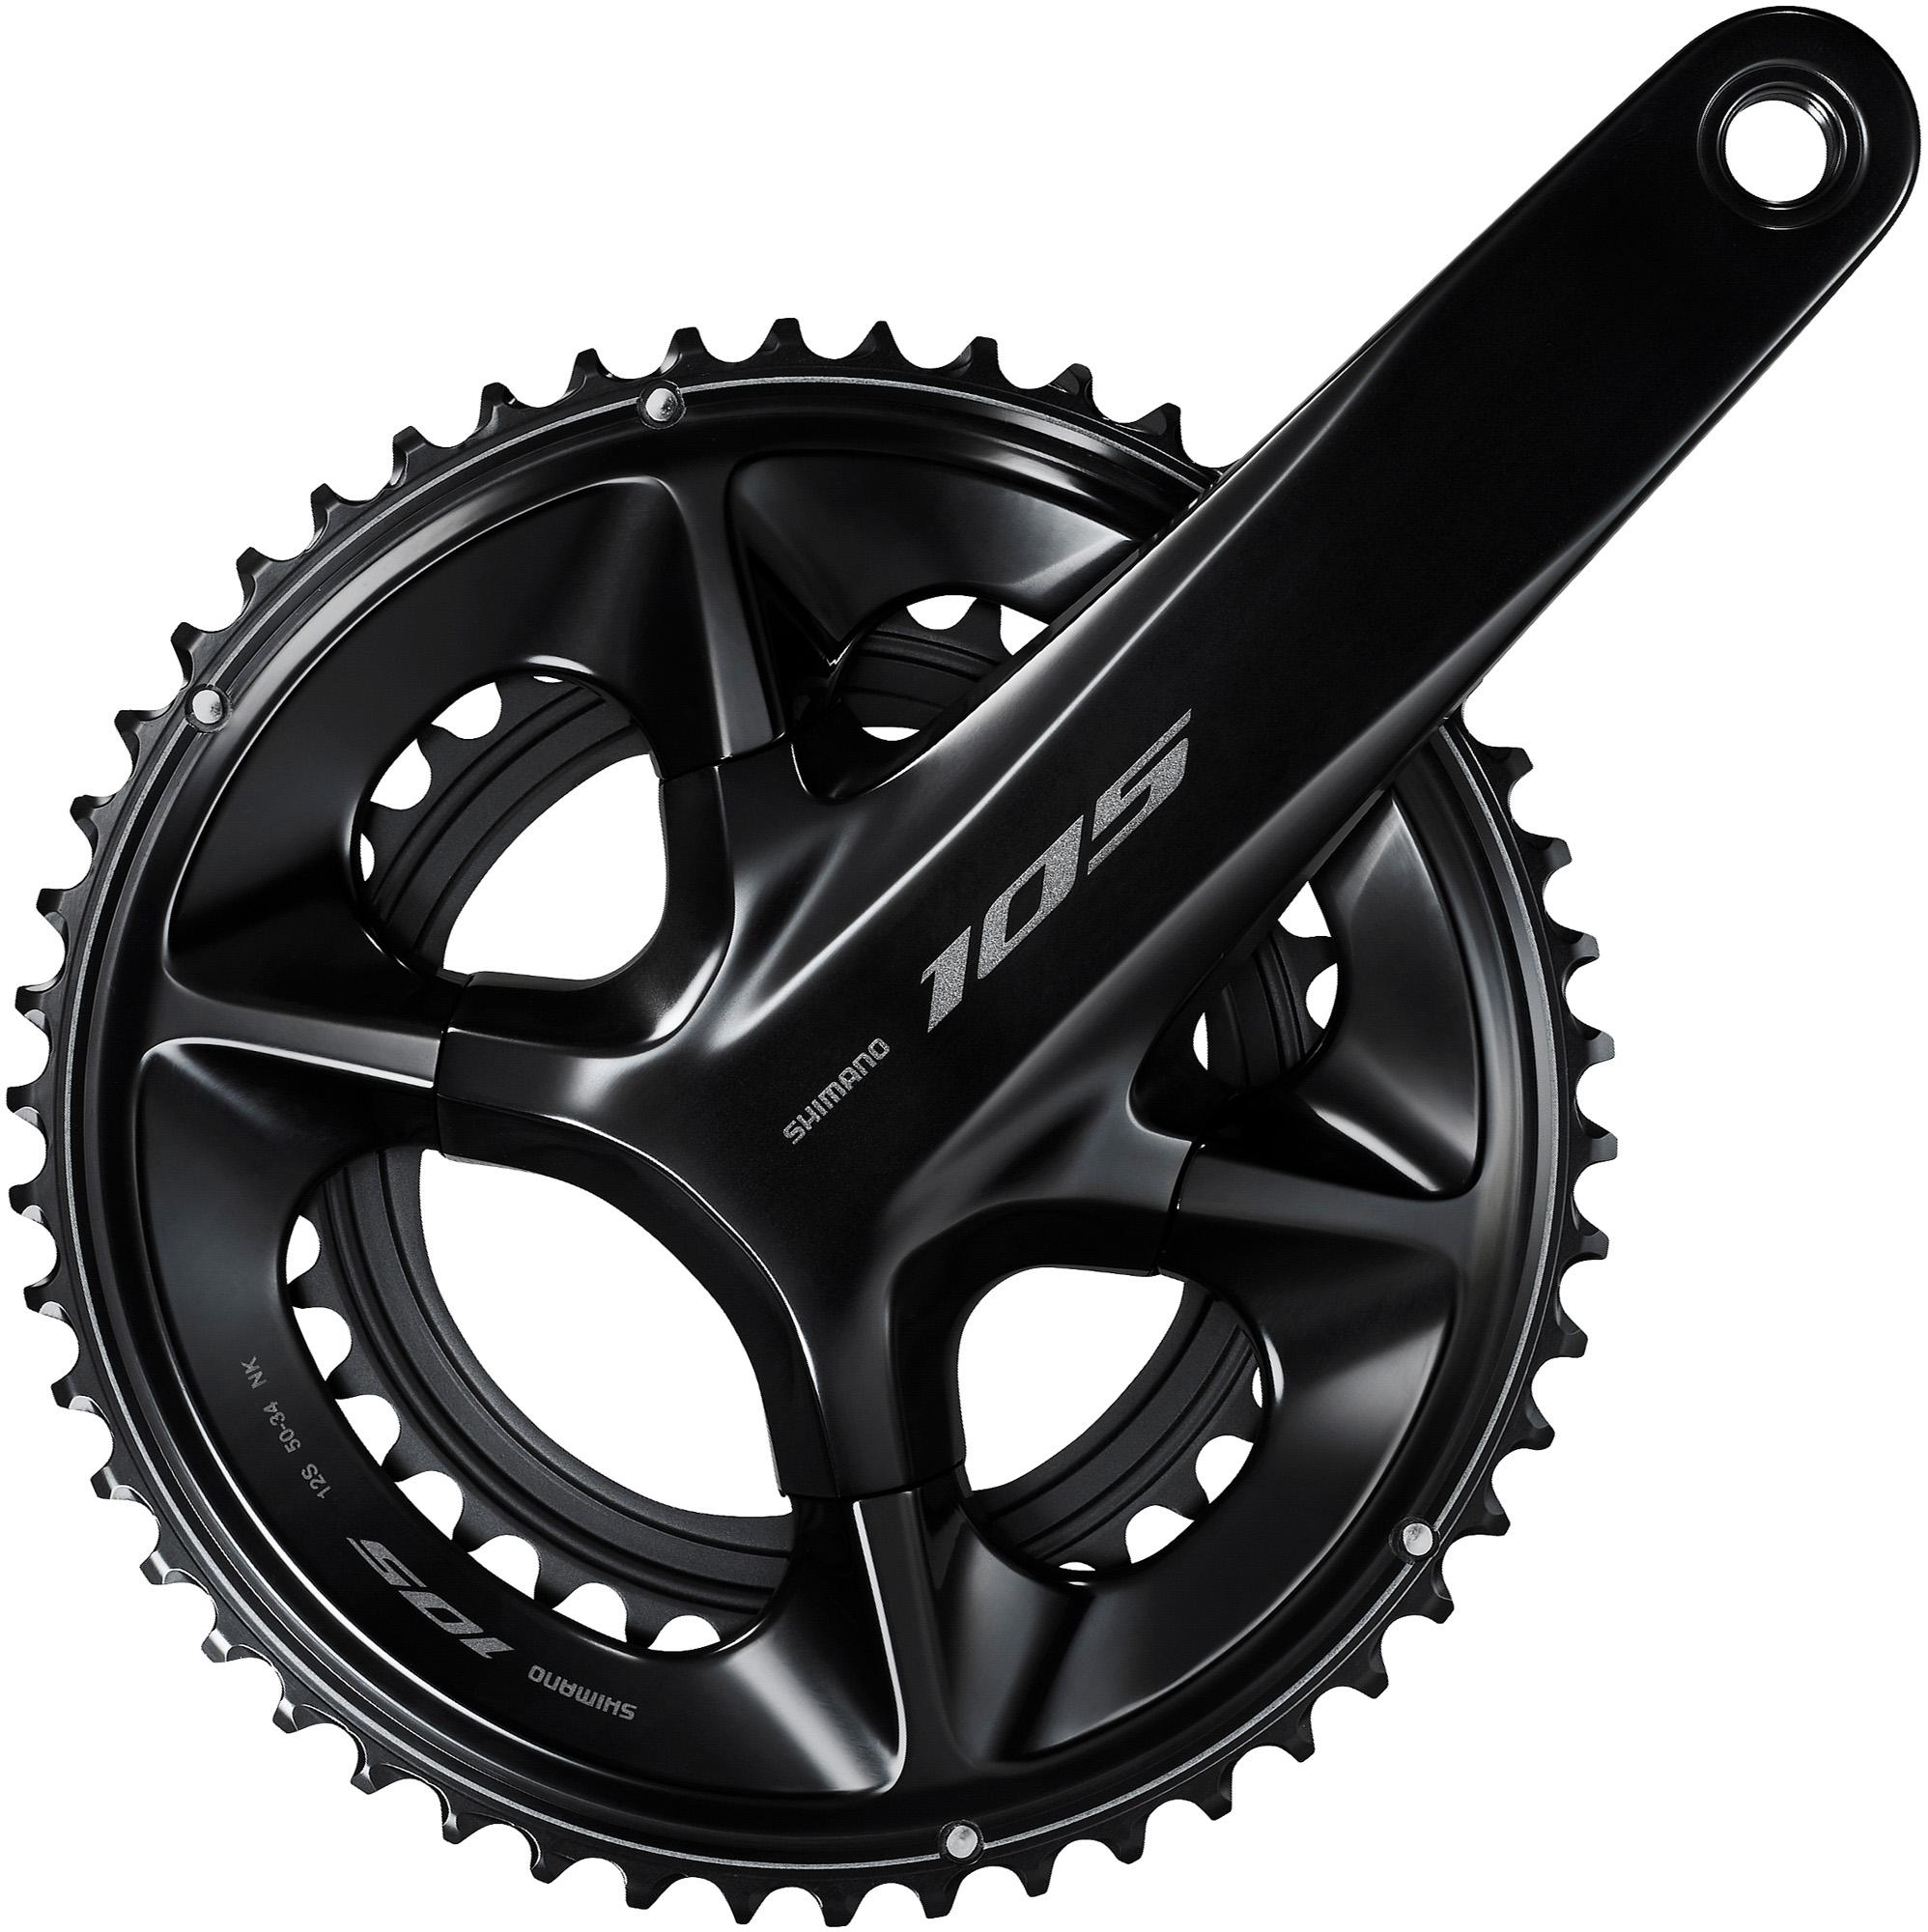 Shimano 105 R7100 12 Speed Double Chainset  Black